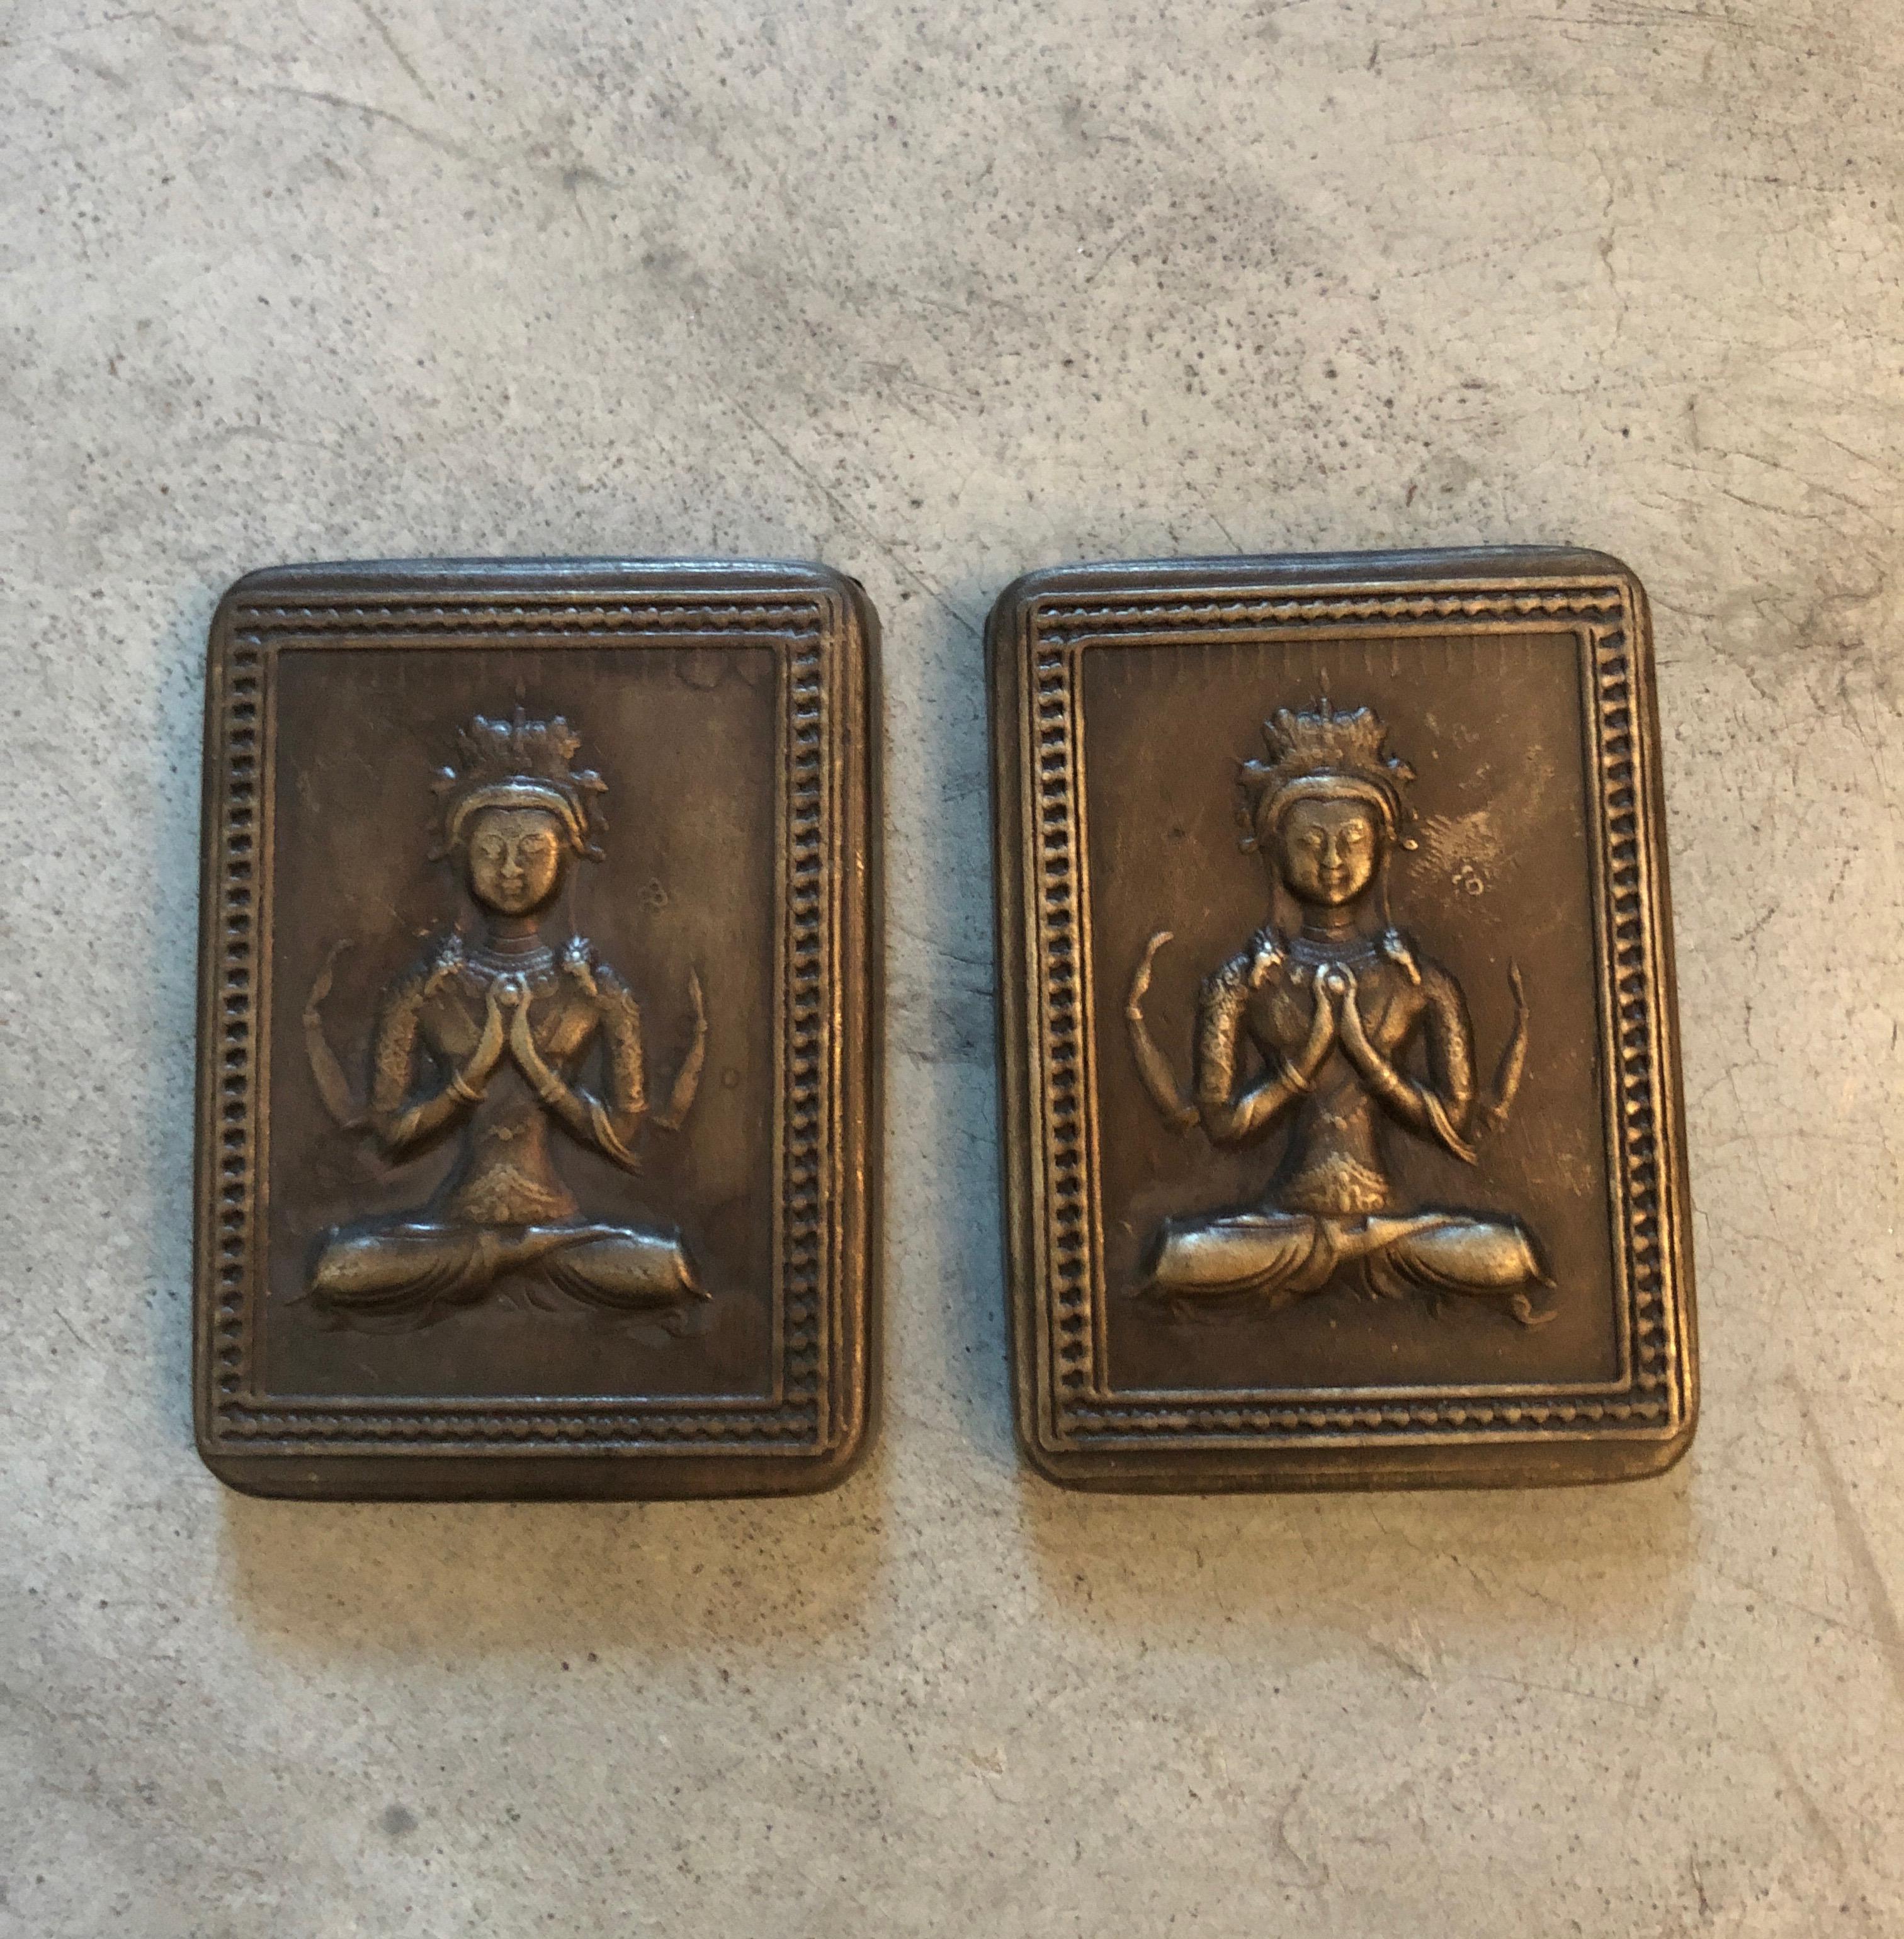 20th Century Bronze Repousse Ink Boxes with Seated Buddha